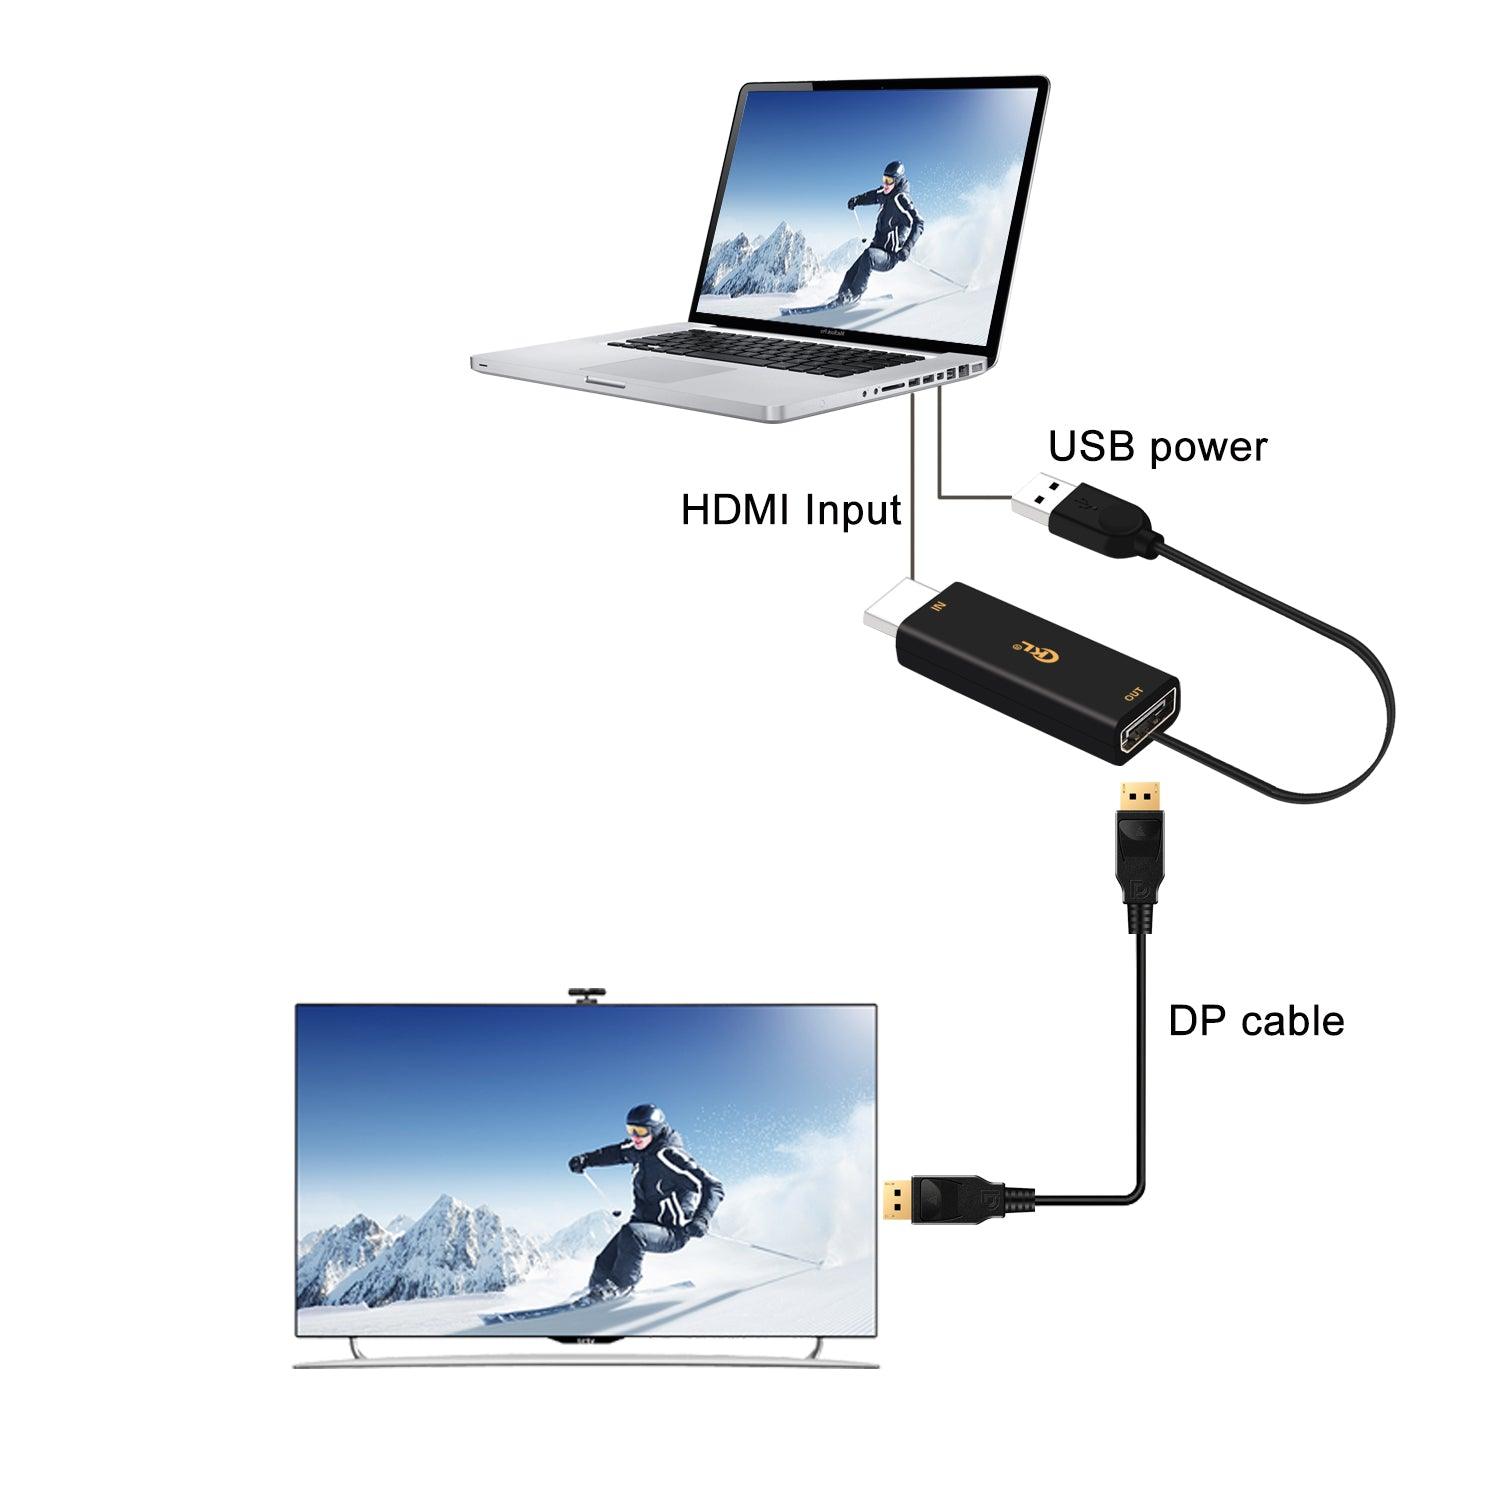 CKL 4Kx2K@60Hz Ultra HD HDMI to DP Adapter with USB Power, HDMI to Displayport Converter Compatible HDCP for CKL KVM Switch, Xbox one, 360, PS4/5, Mac, NS and More - CKL KVM Switches